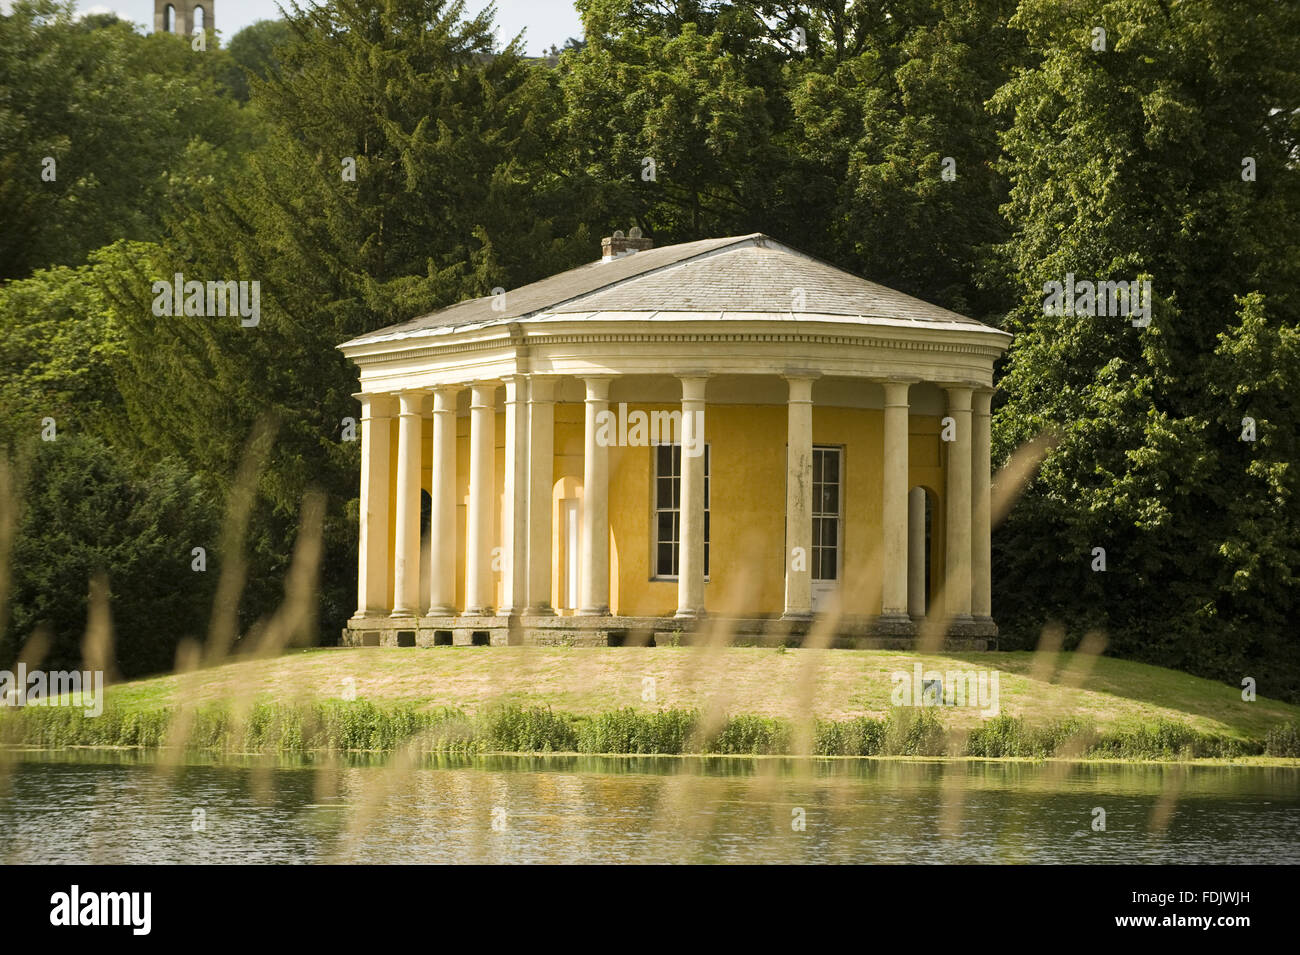 The Music Temple on an island in the lake at West Wycombe Park, Buckinghamshire. The temple has a Doric colonnade, and was designed by Nicholas Revett in the 1770s. Stock Photo